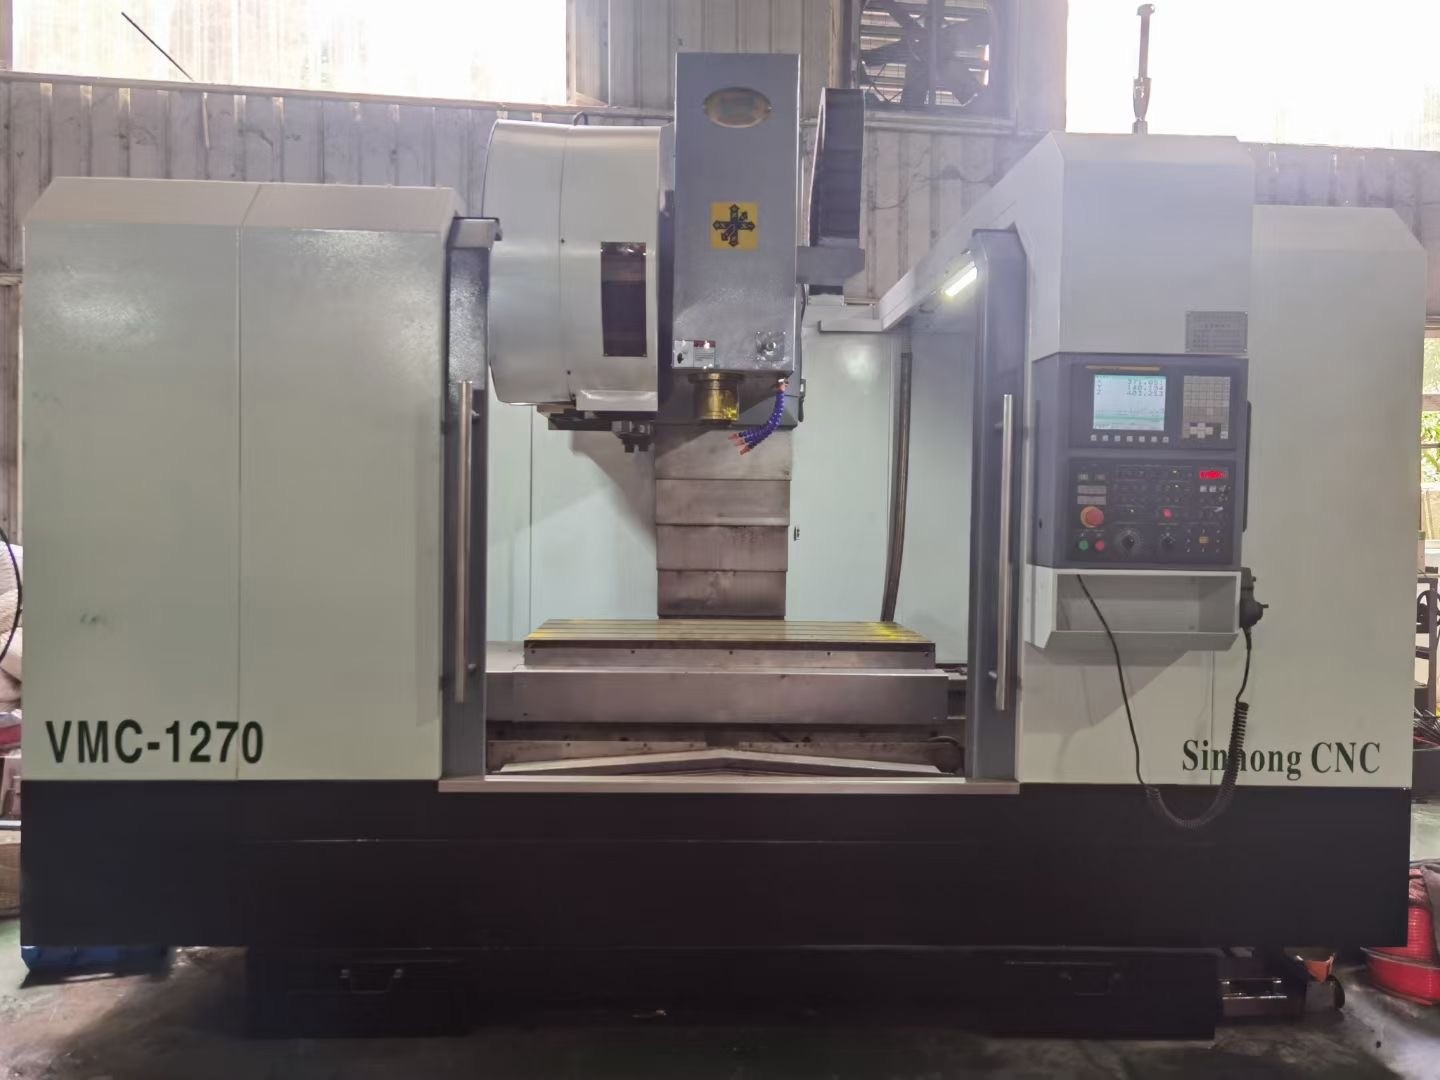  Used 3 Axis CNC Horizontal Machining Center BT 50 VMC CNC Milling Machine Manufactures